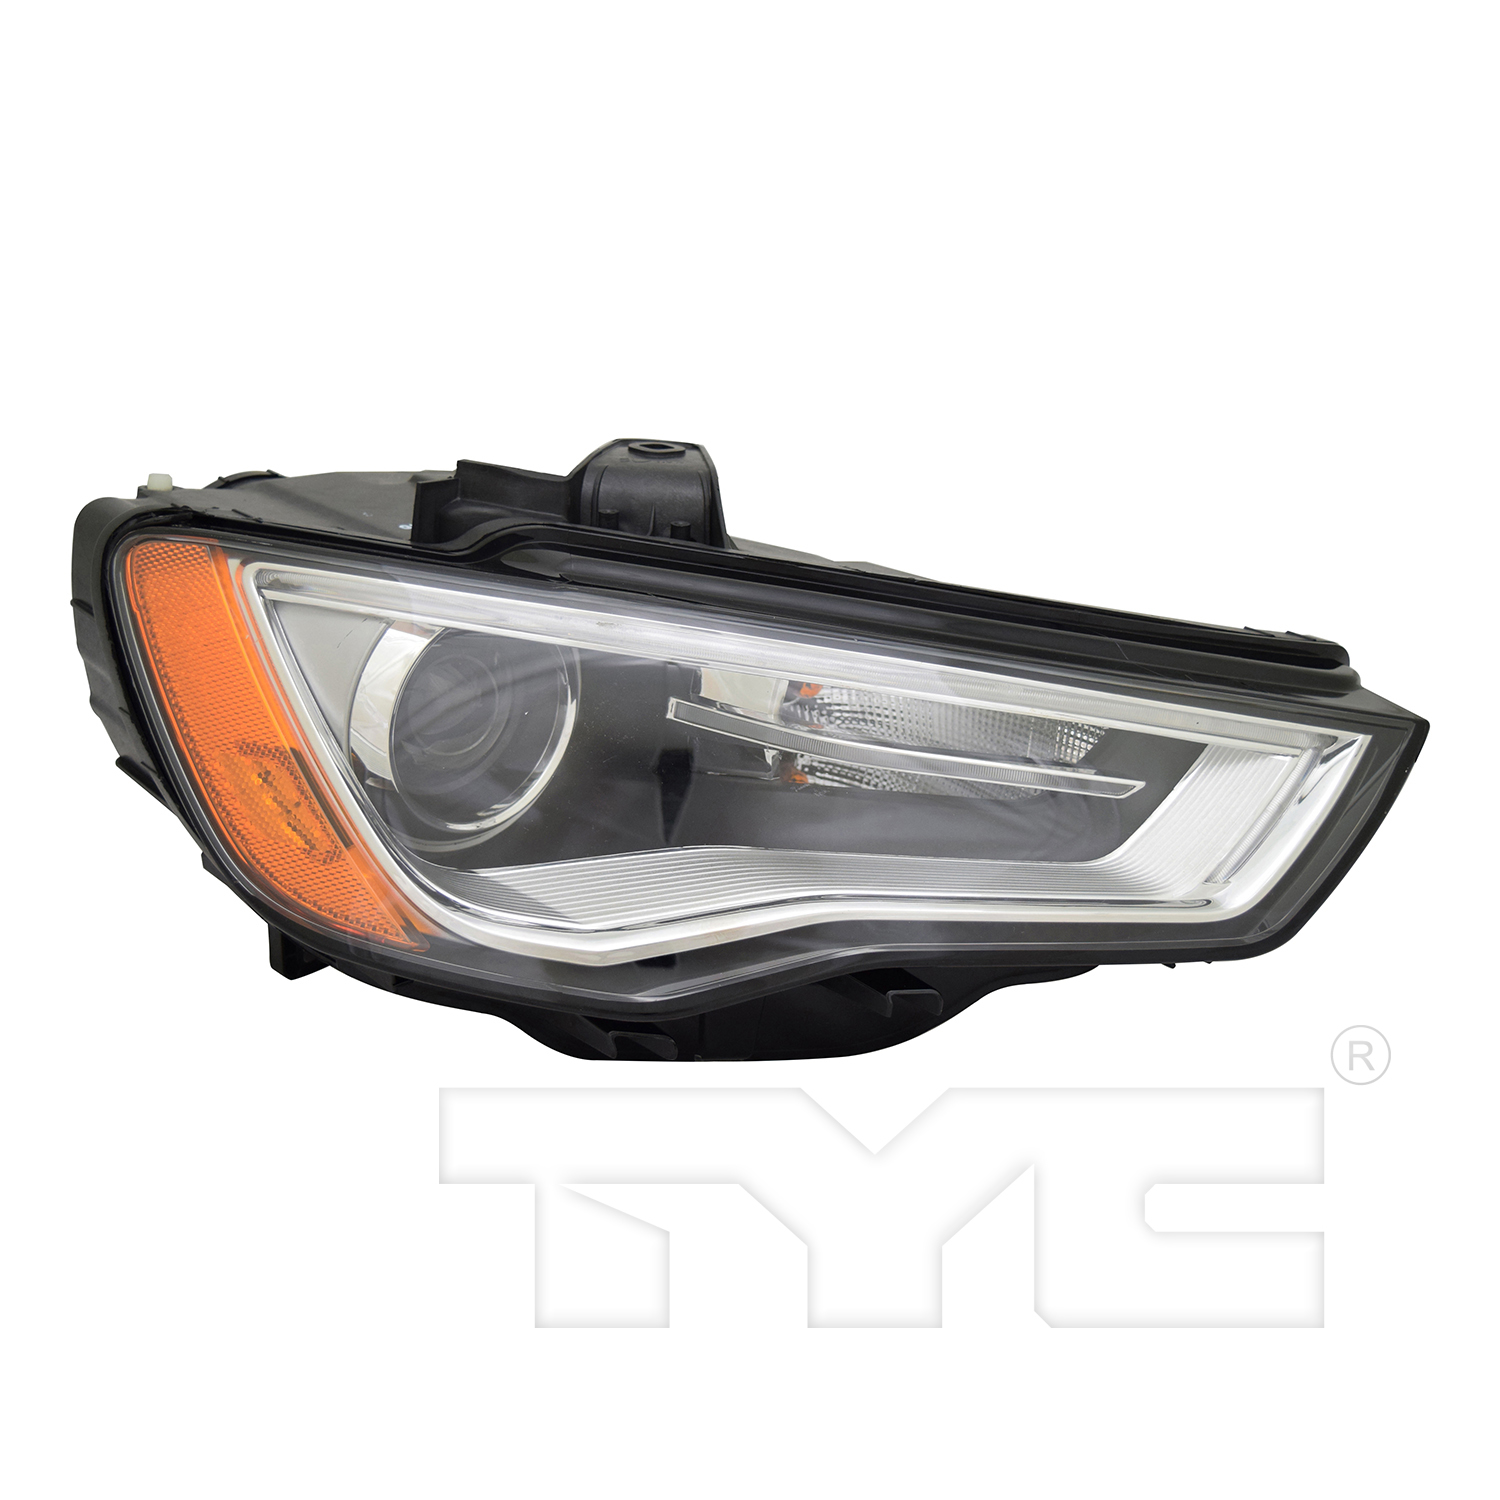 Aftermarket HEADLIGHTS for AUDI - S3, S3,15-16,RT Headlamp assy composite